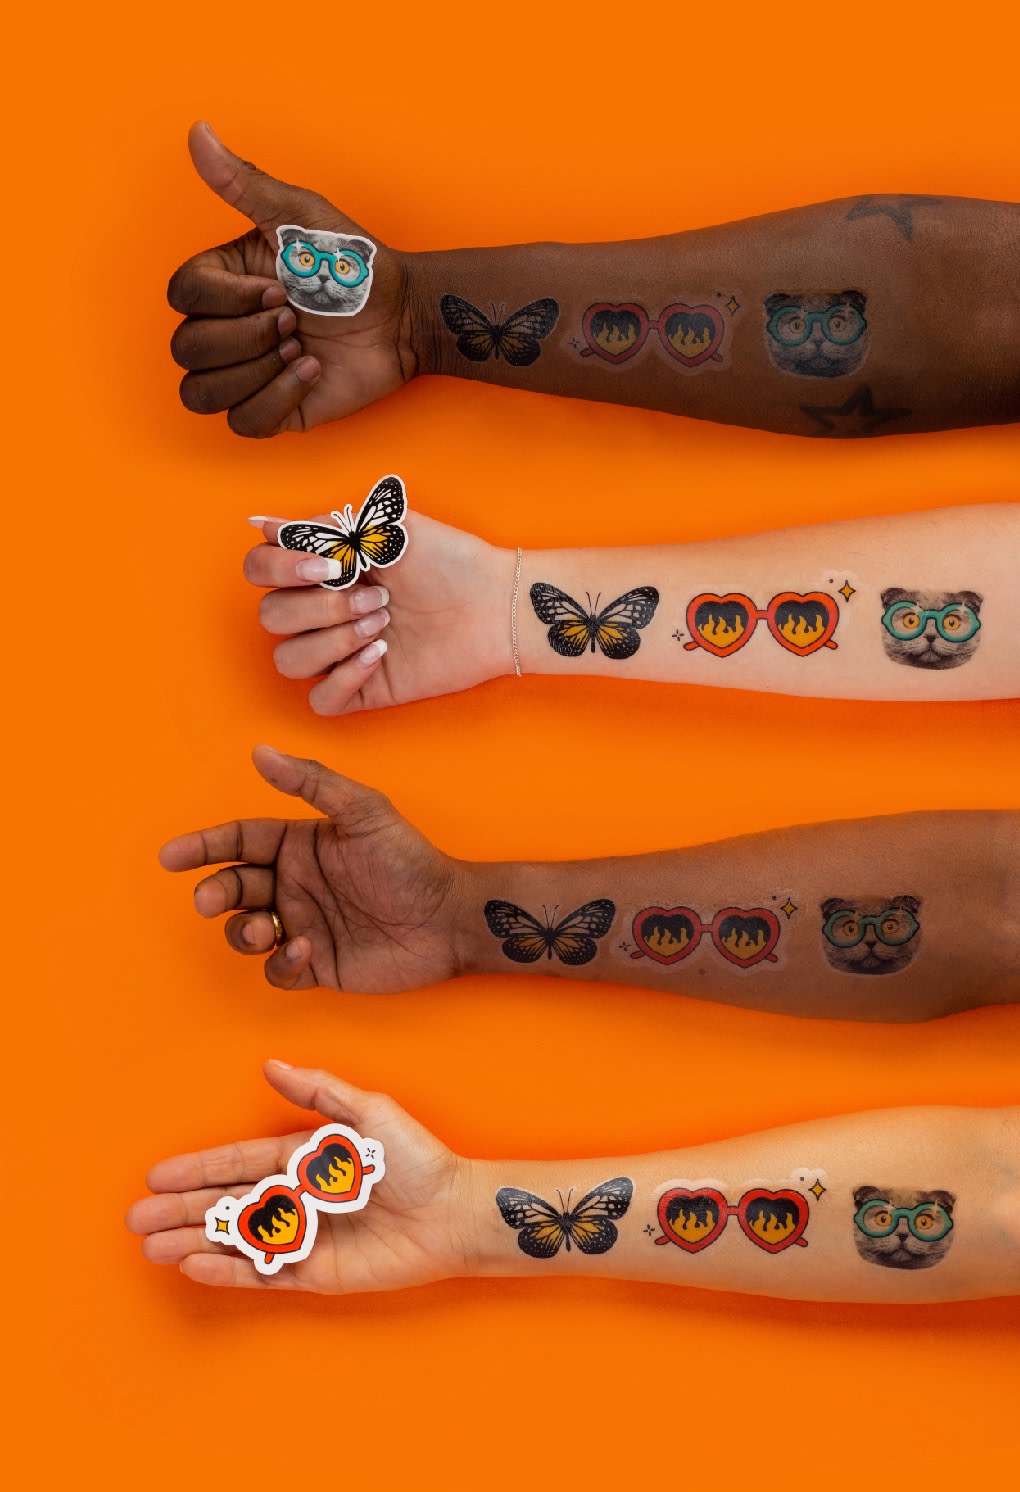 How custom temporary tattoos look on different skin tones